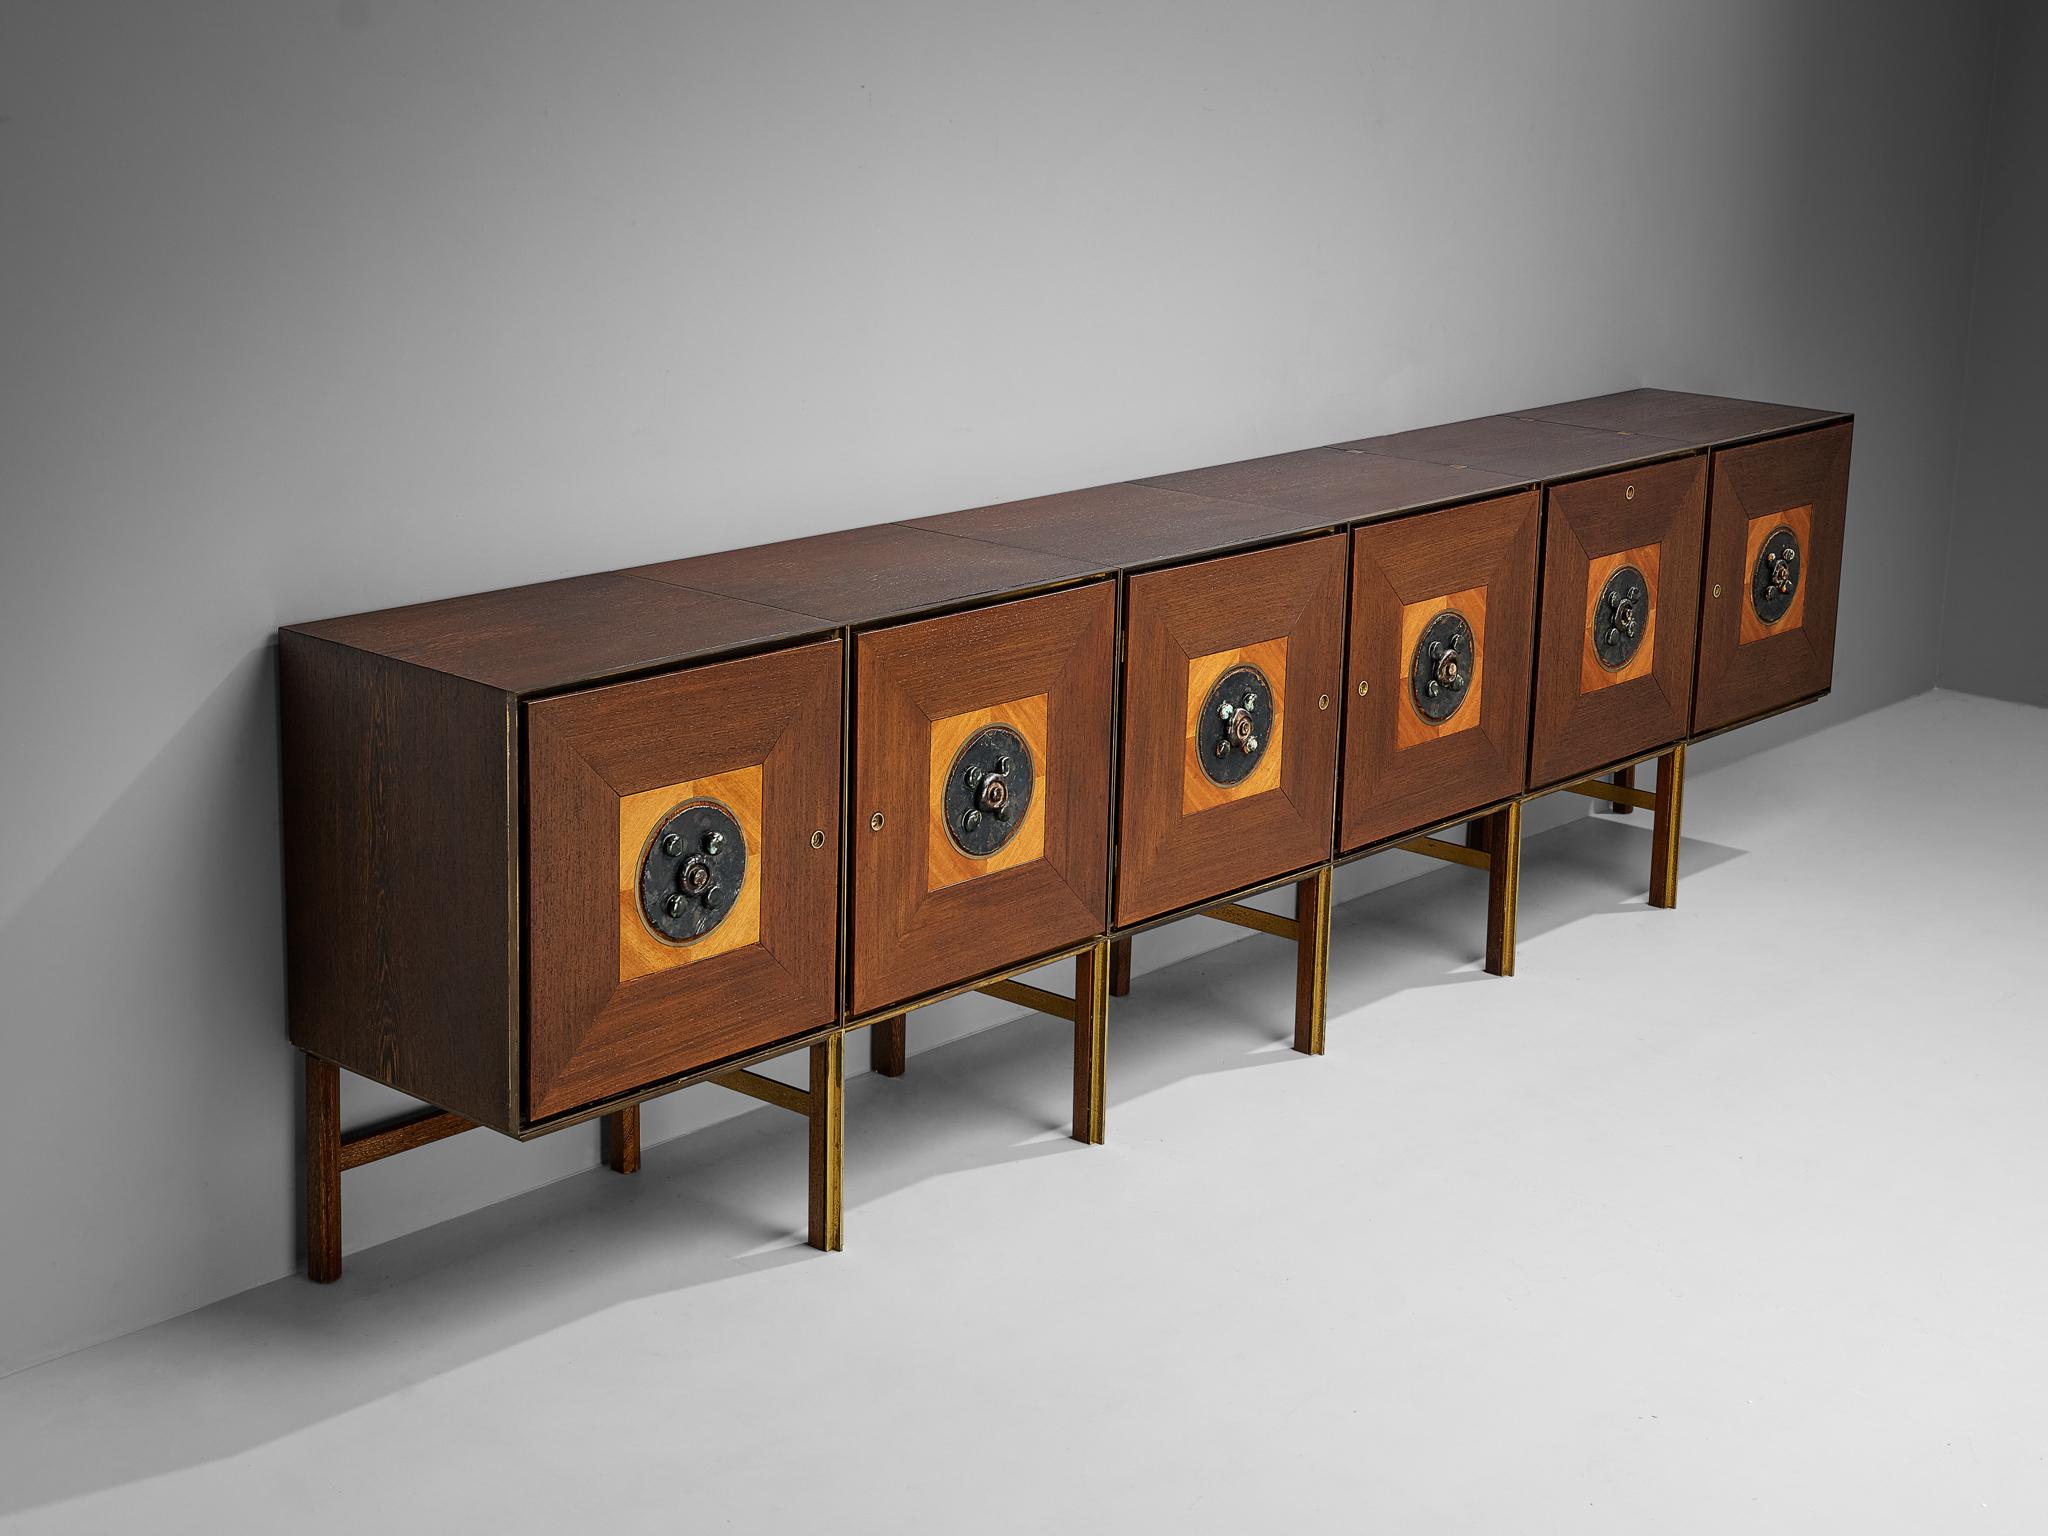 Sideboard, wenge, mahogany, brass, melamine, ceramic, Belgium, 1970s. 

This unique custom made sideboard is constructed in the finest manner. The elongated wooden corpus is executed in wenge wood, a natural Material that has an incredibly, visual